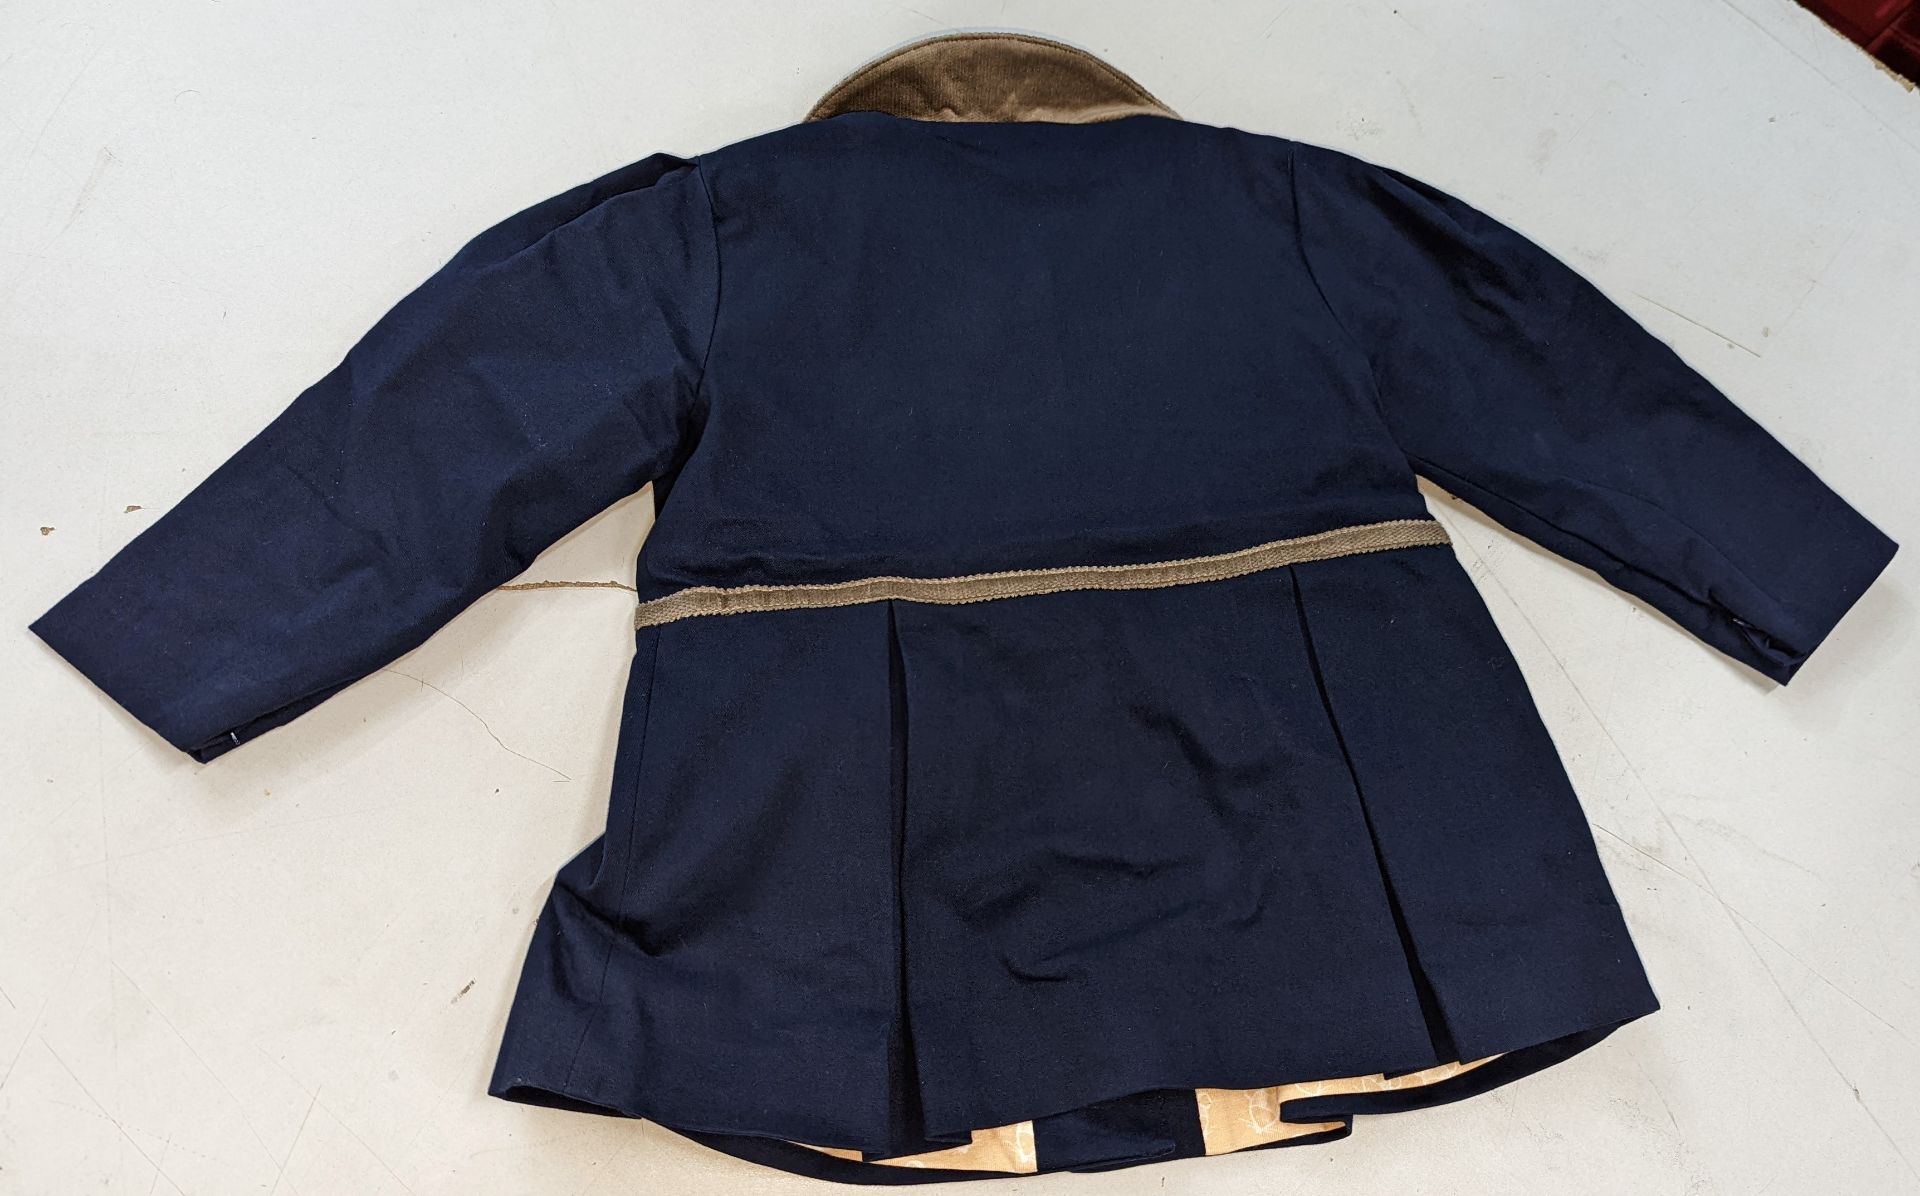 20 off Mosé Baby girl's dress coats in navy, with skirted design, velvet collar and waist trim plus - Image 2 of 11